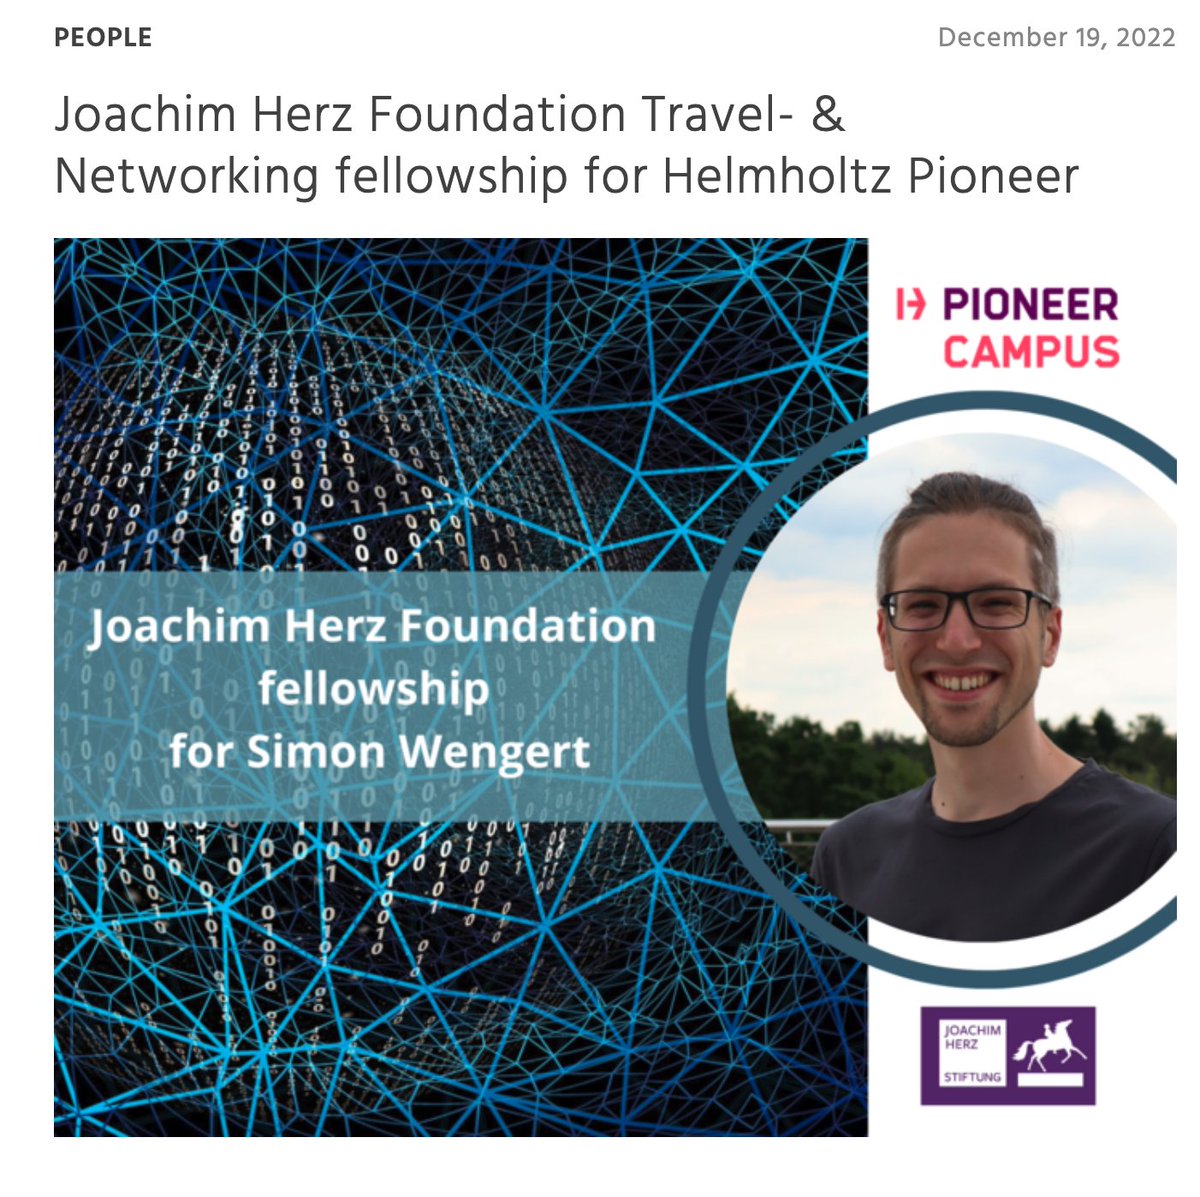 THANK YOU @jherzstiftung facilitating @Health_talents @MunichDS student to venture across #science #fields create #interdisciplinary collaborations & contacts. #crucialcareersupport 👏🎇✅ pioneercampus.org/themenmenue-re…